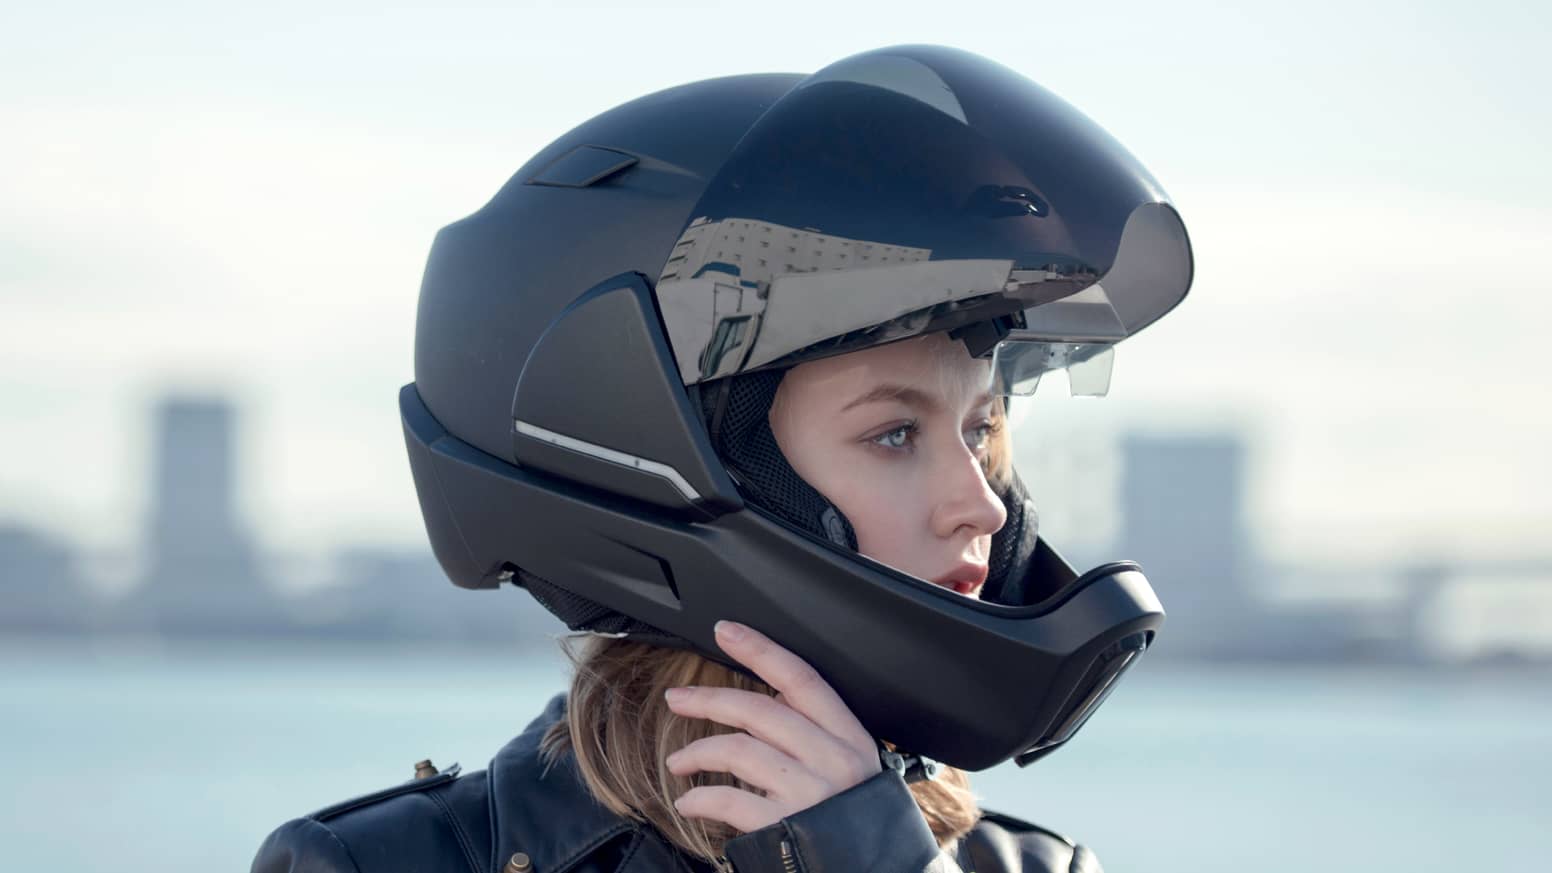 New High-Tech Helmet Designed For Motorcycle Drivers